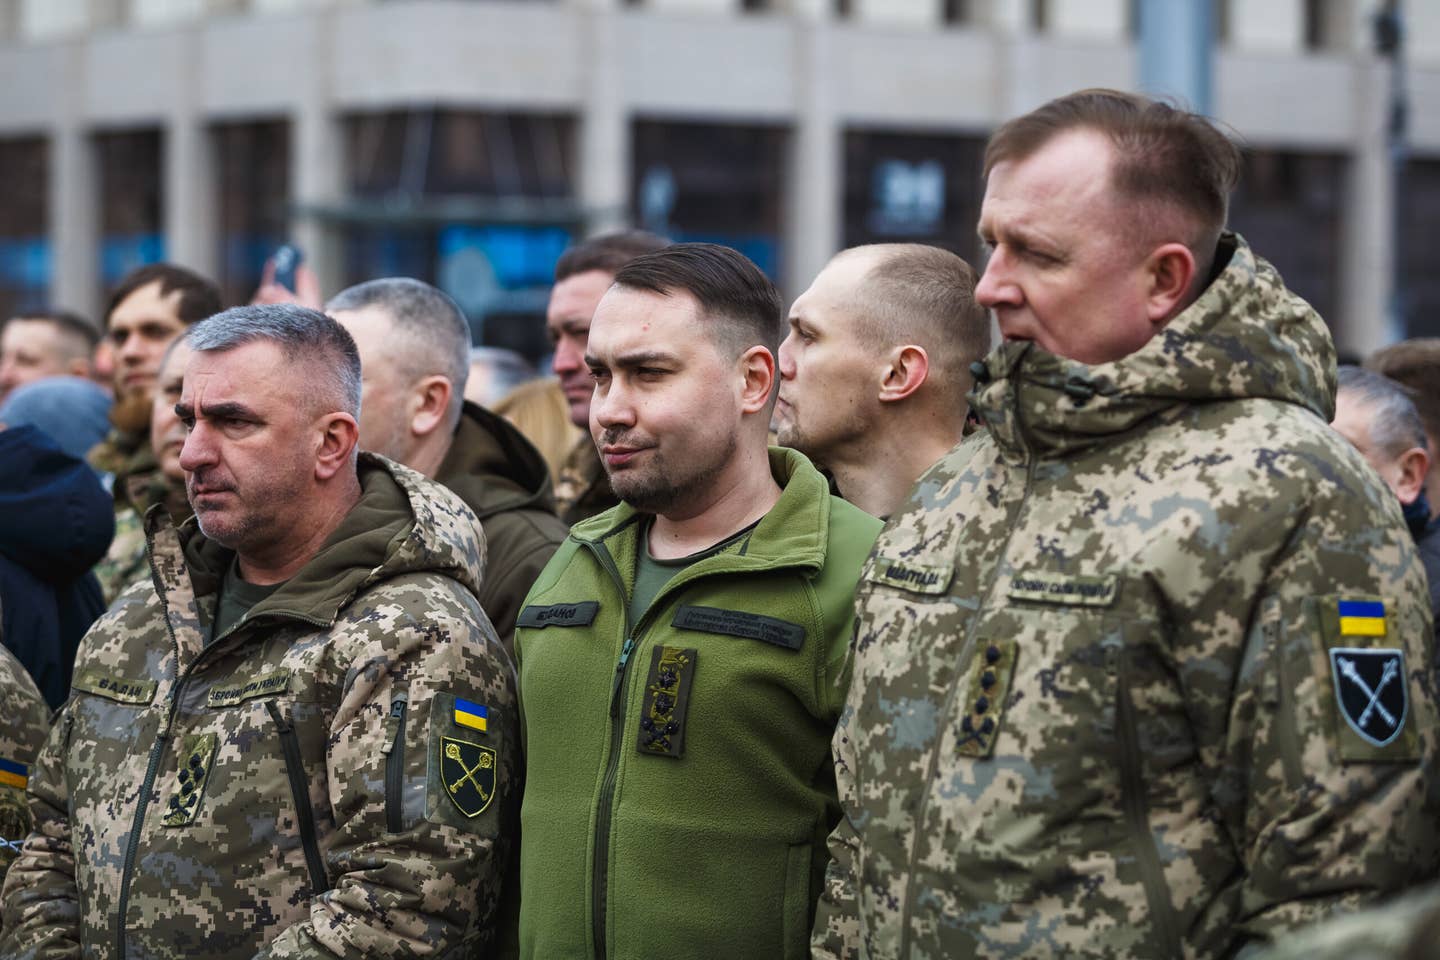 Now Lt. Gen. Kyrylo Budanov (C) attends the farewell ceremony for Dmytro Kotsiubailo on Independence Square on March 10, 2023 in Kyiv, Ukraine. (Photo by Yurii Stefanyak/Global Images Ukraine via Getty Images)